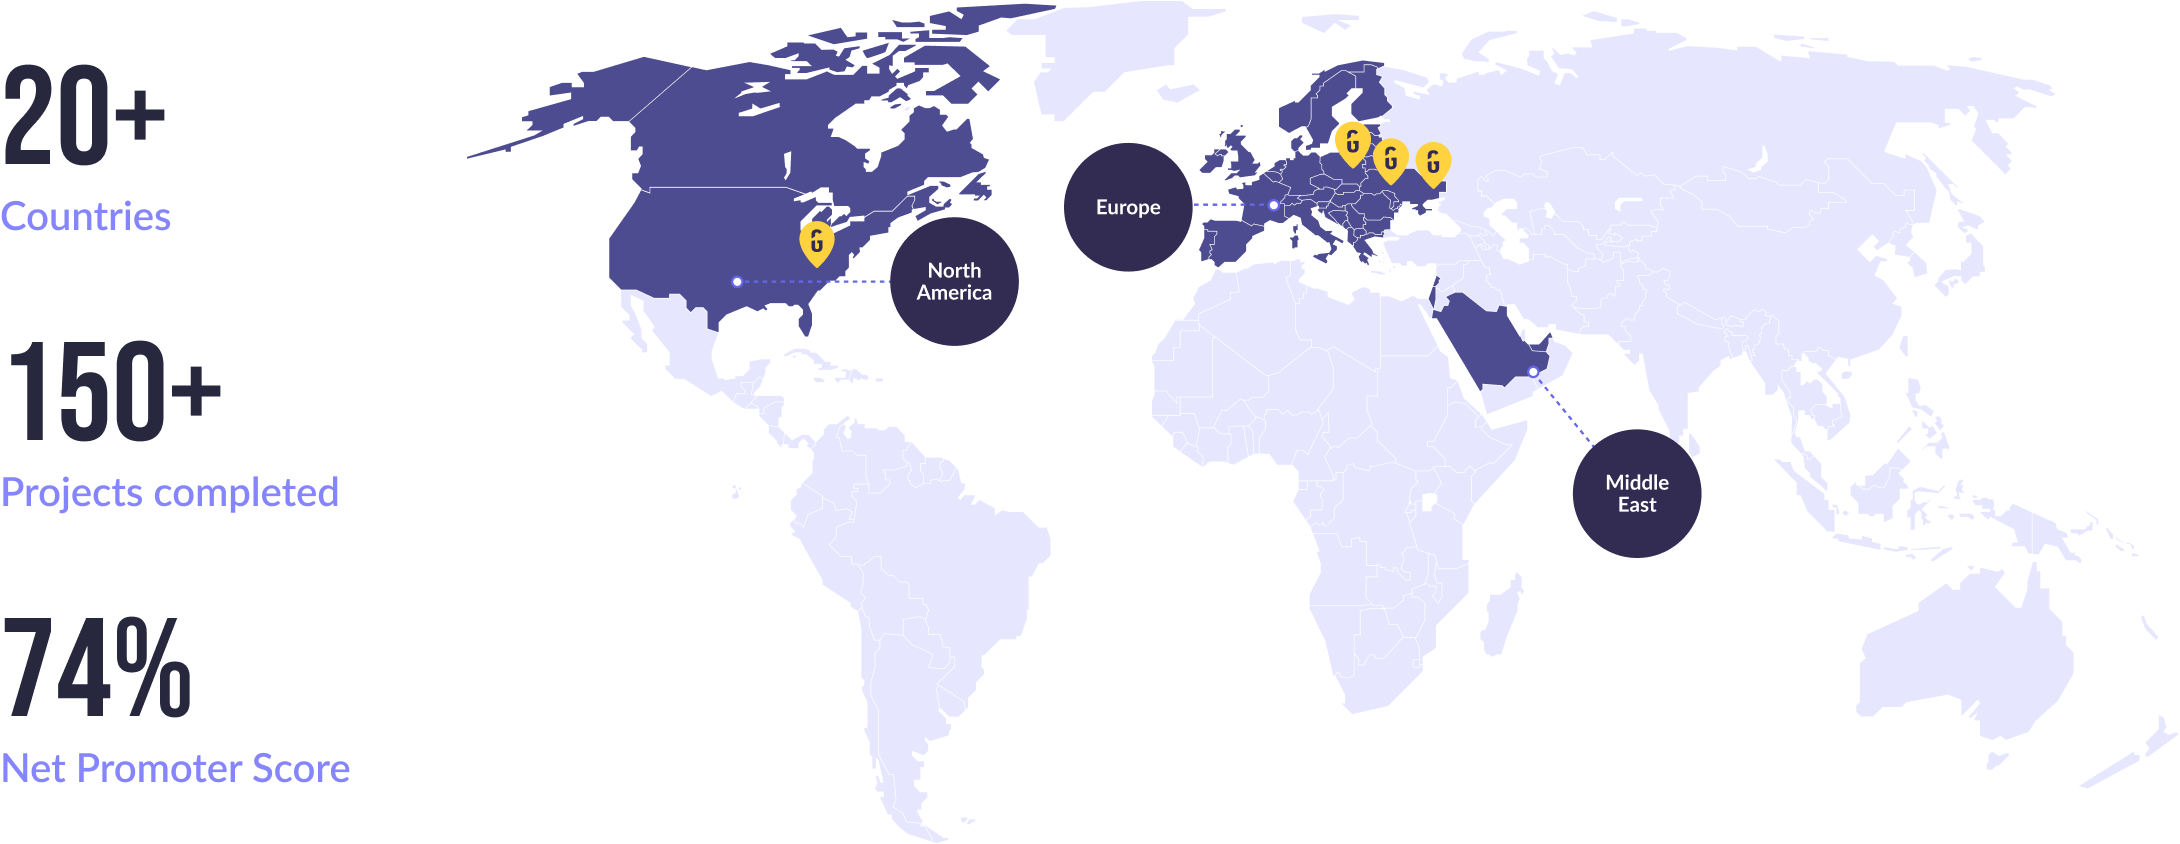 Our locations and achievements